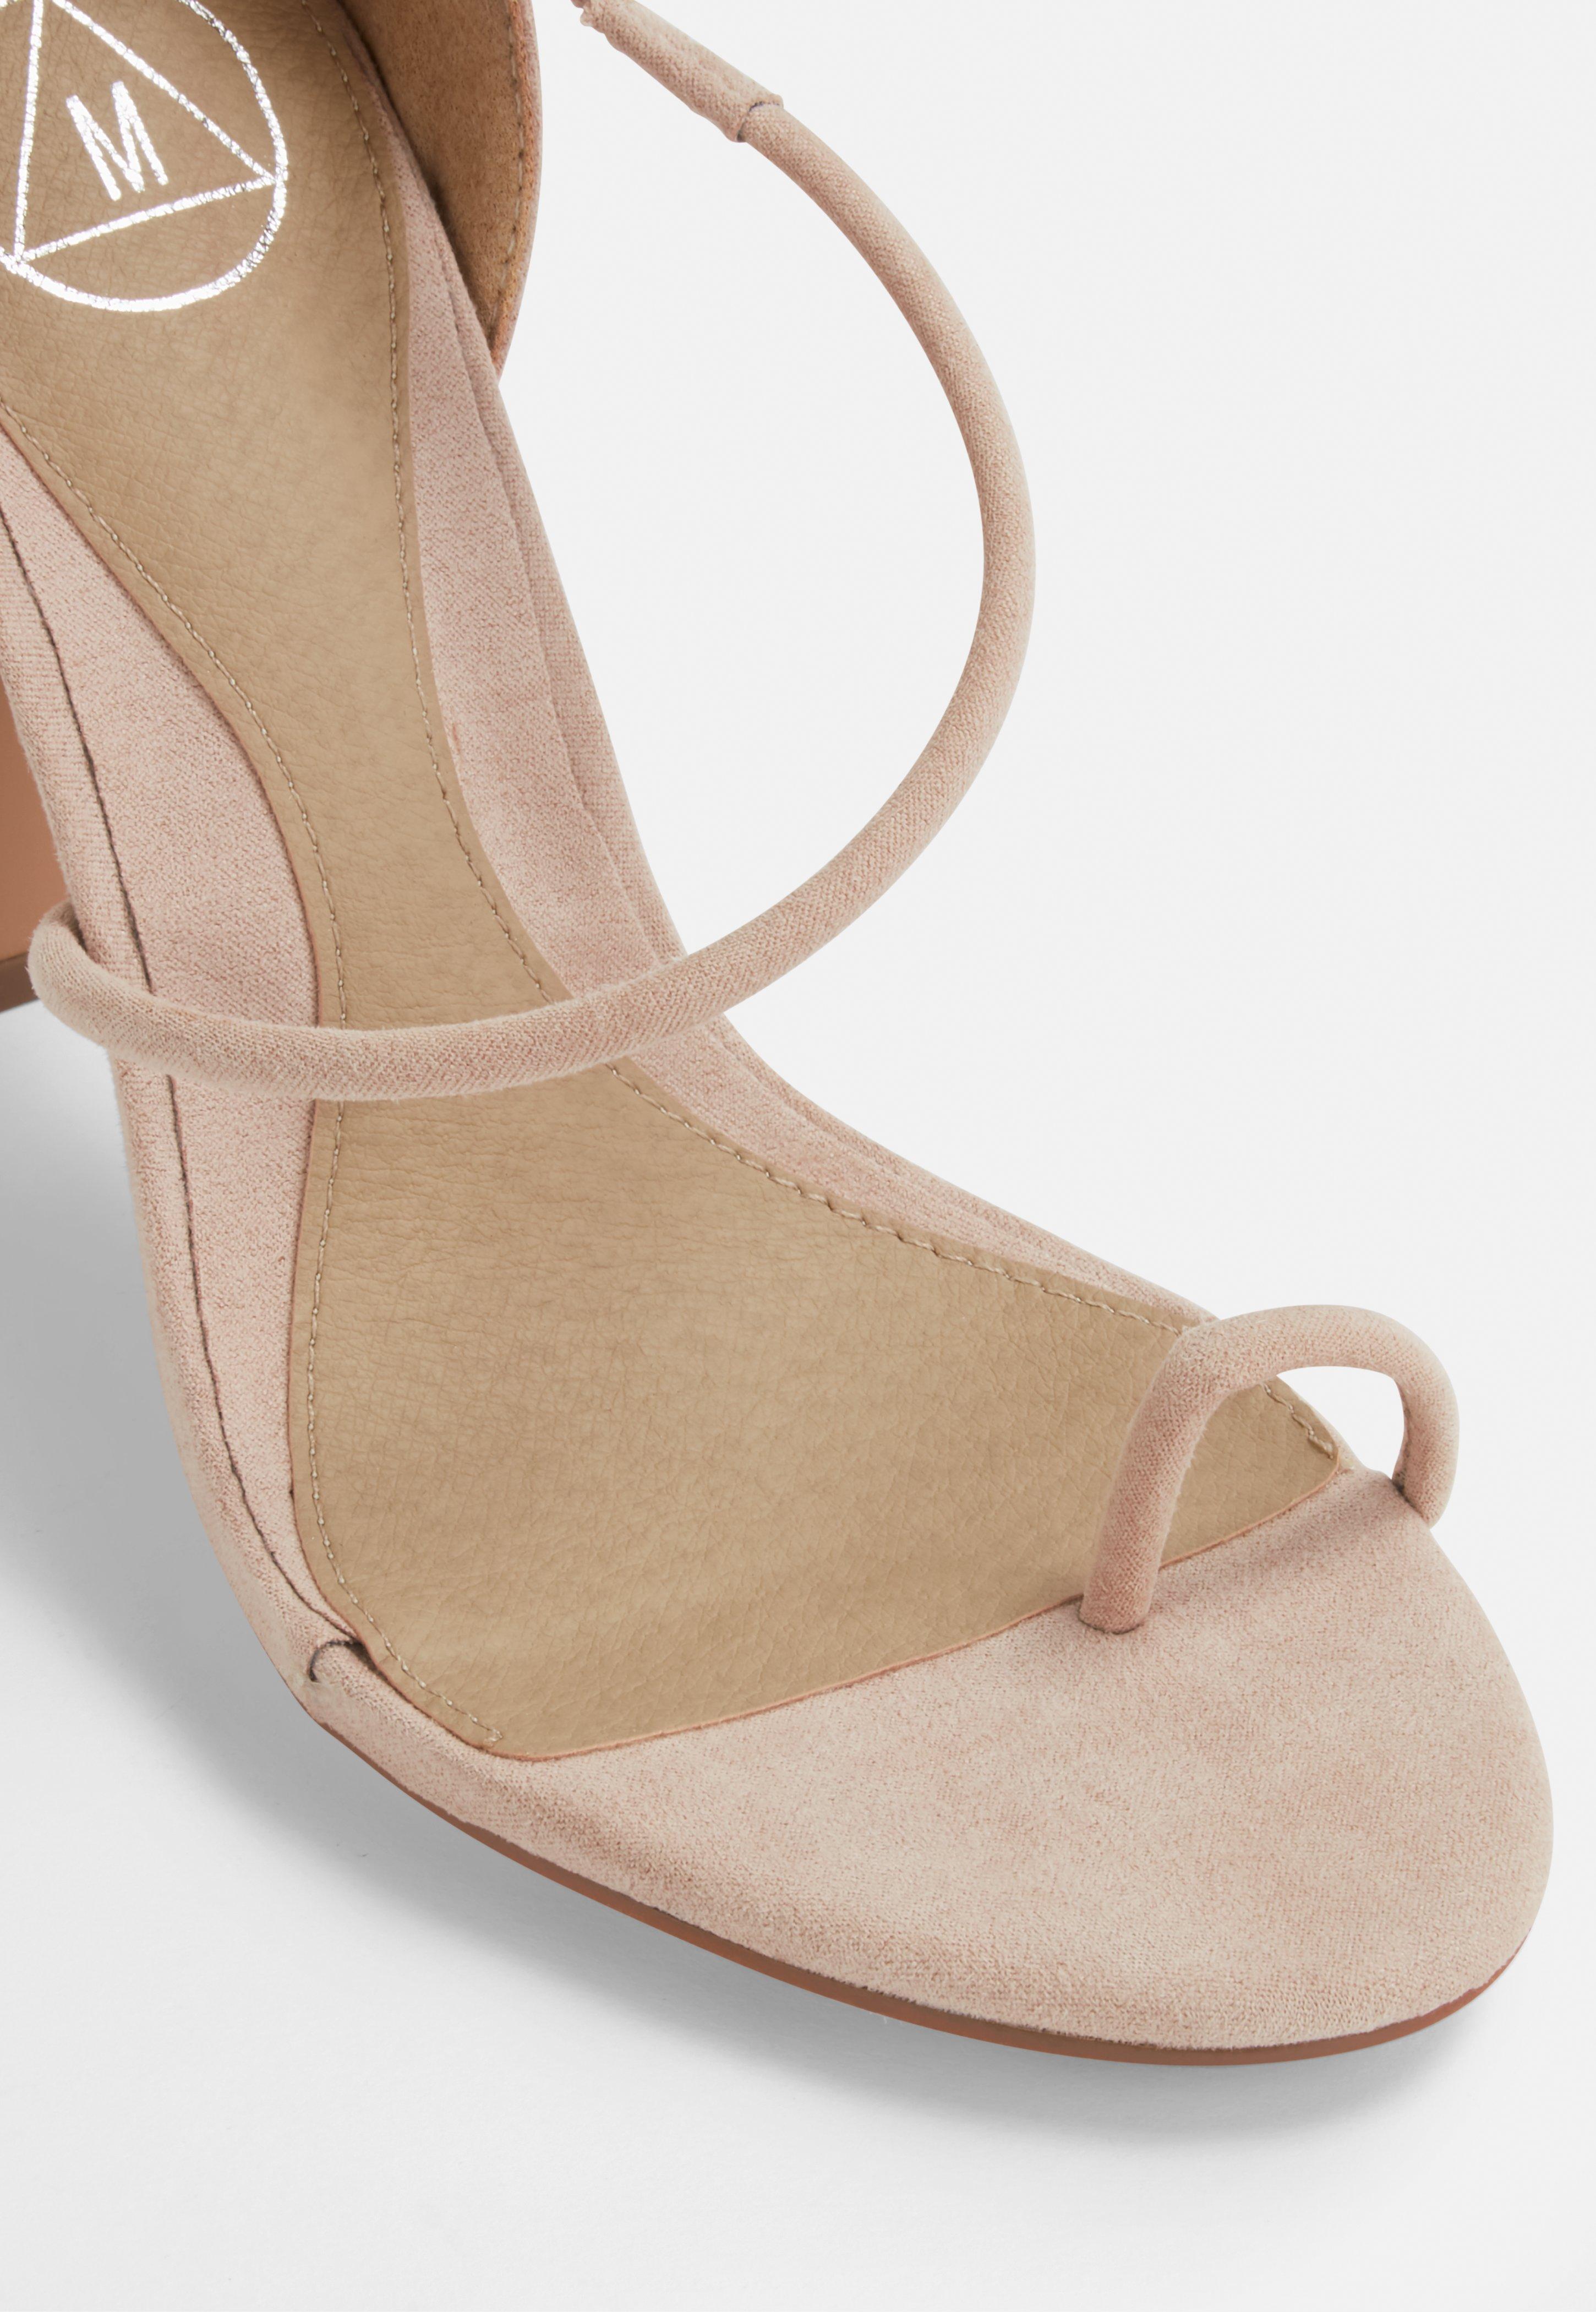 Missguided Nude Strappy Toe Post Heeled Sandals in Natural - Lyst